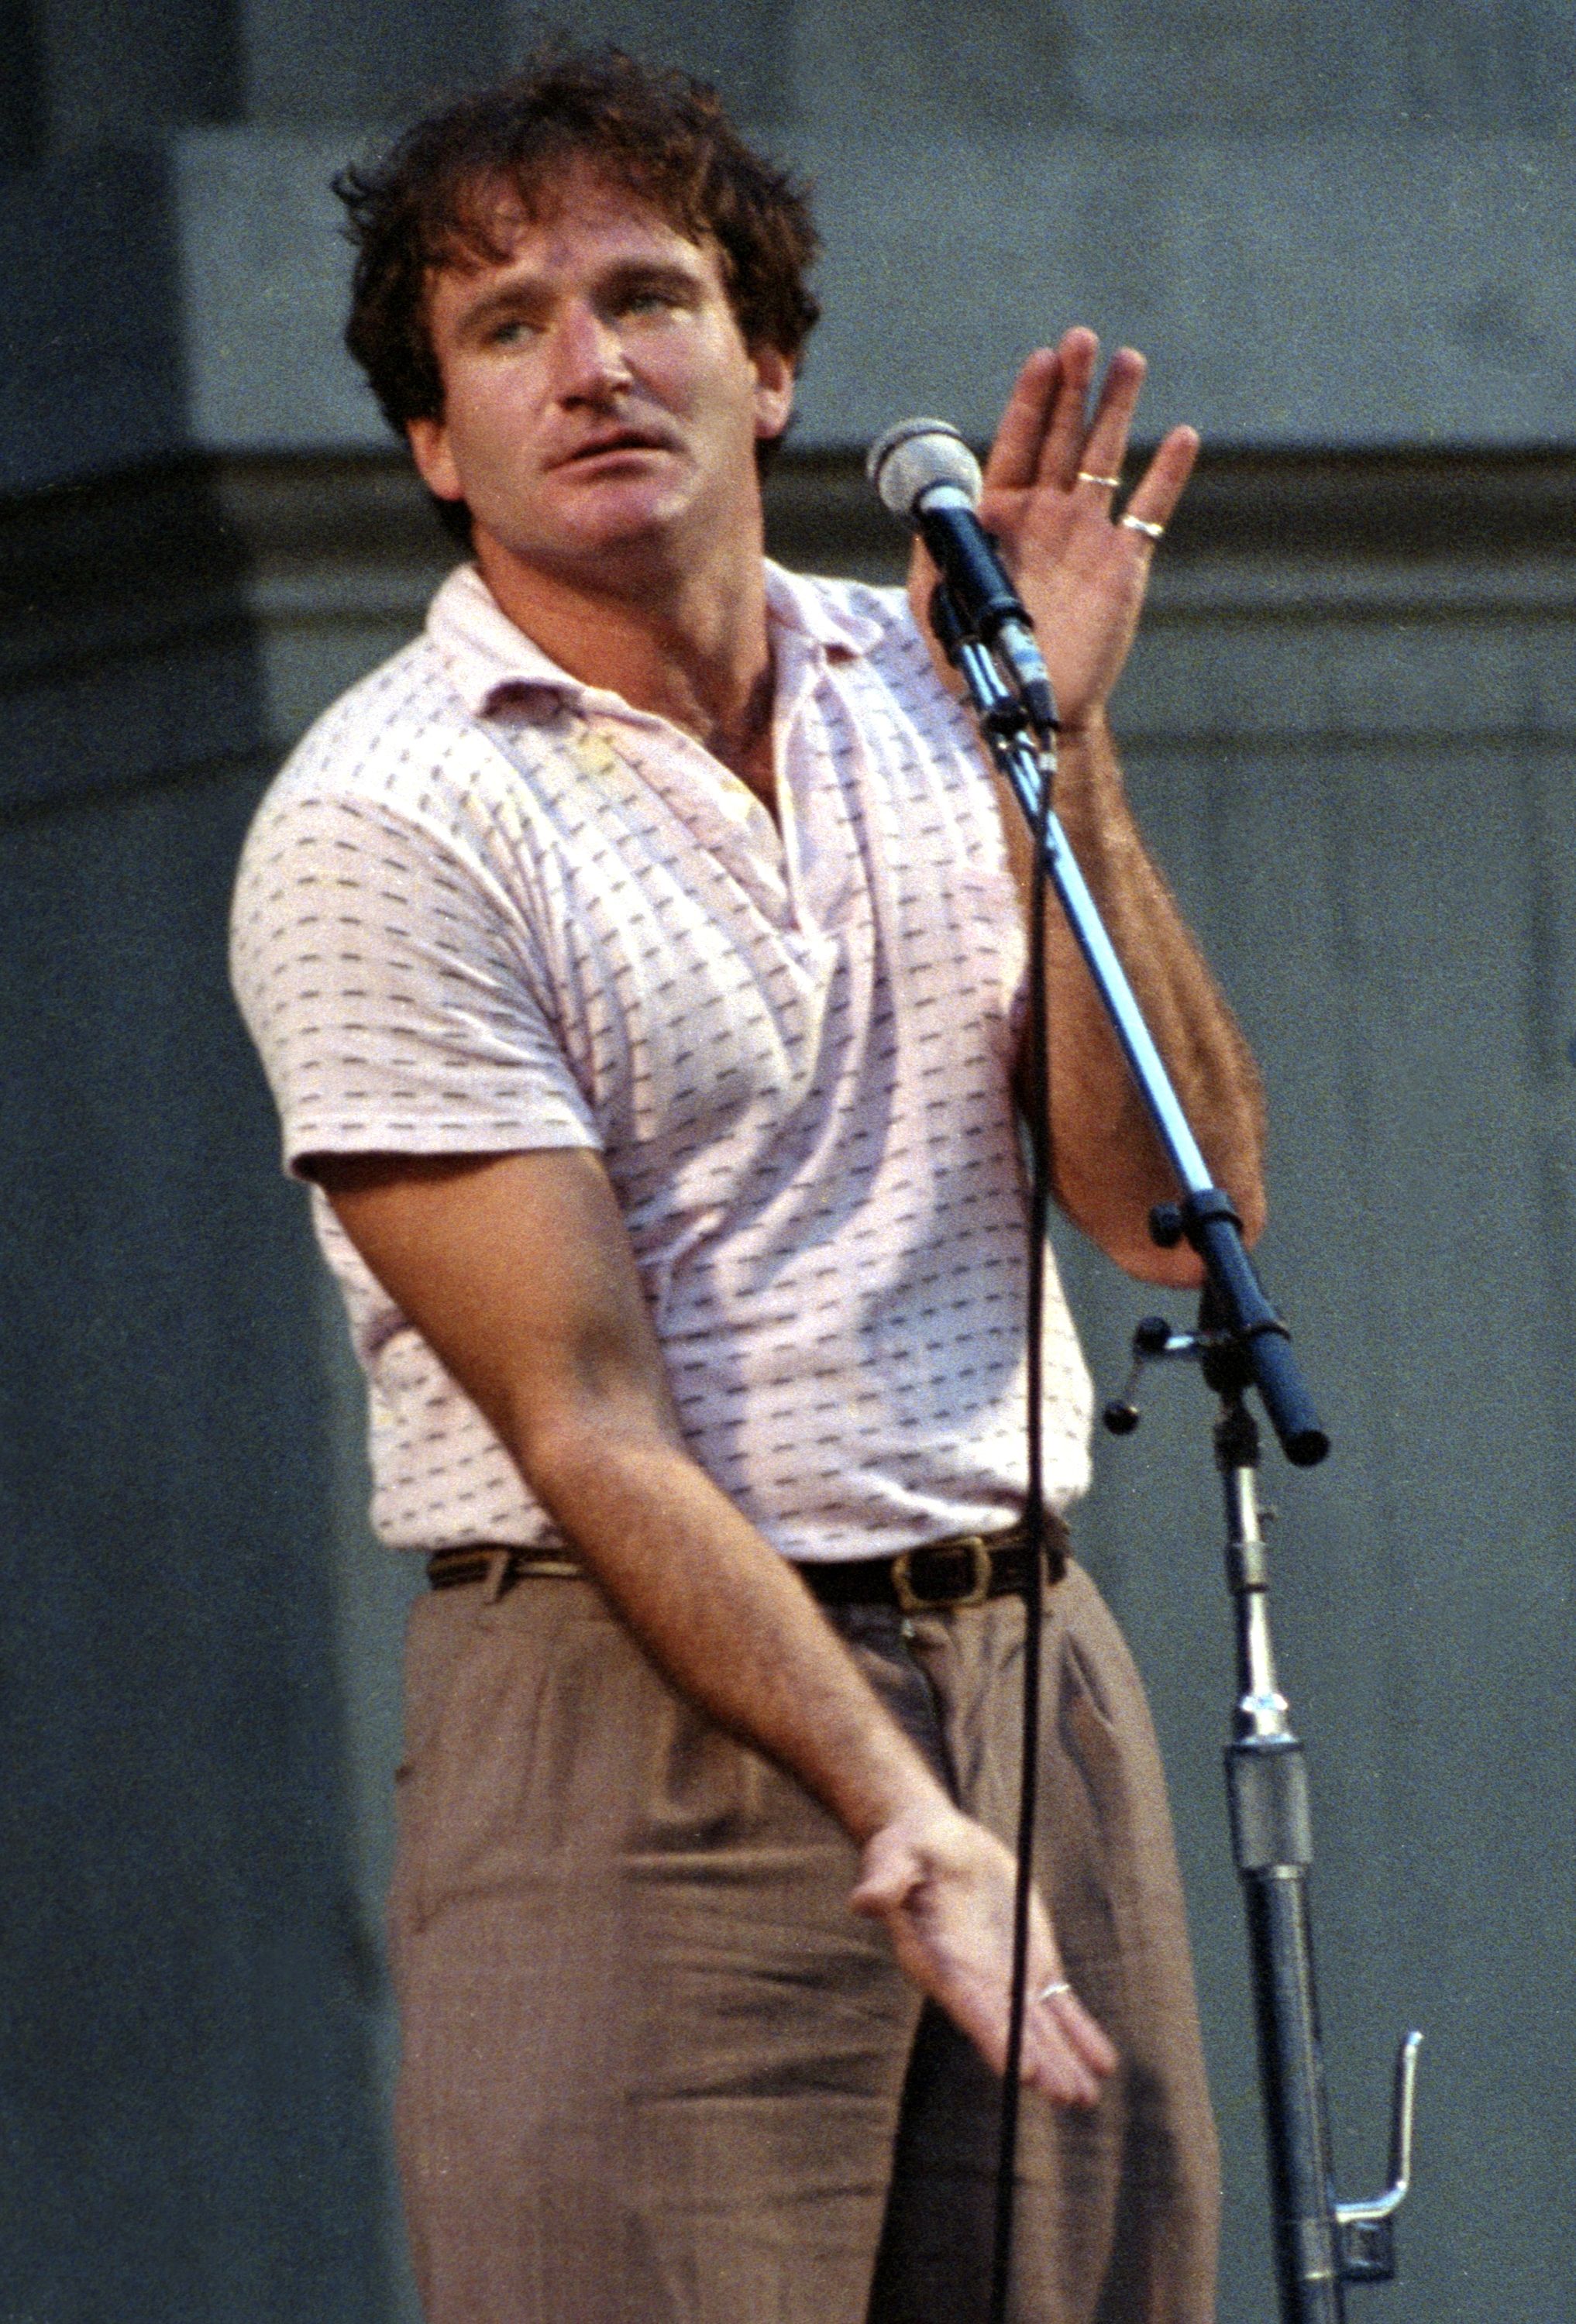 Robin Williams performs during the Bread and Roses benefit concert. | Source: Getty Images